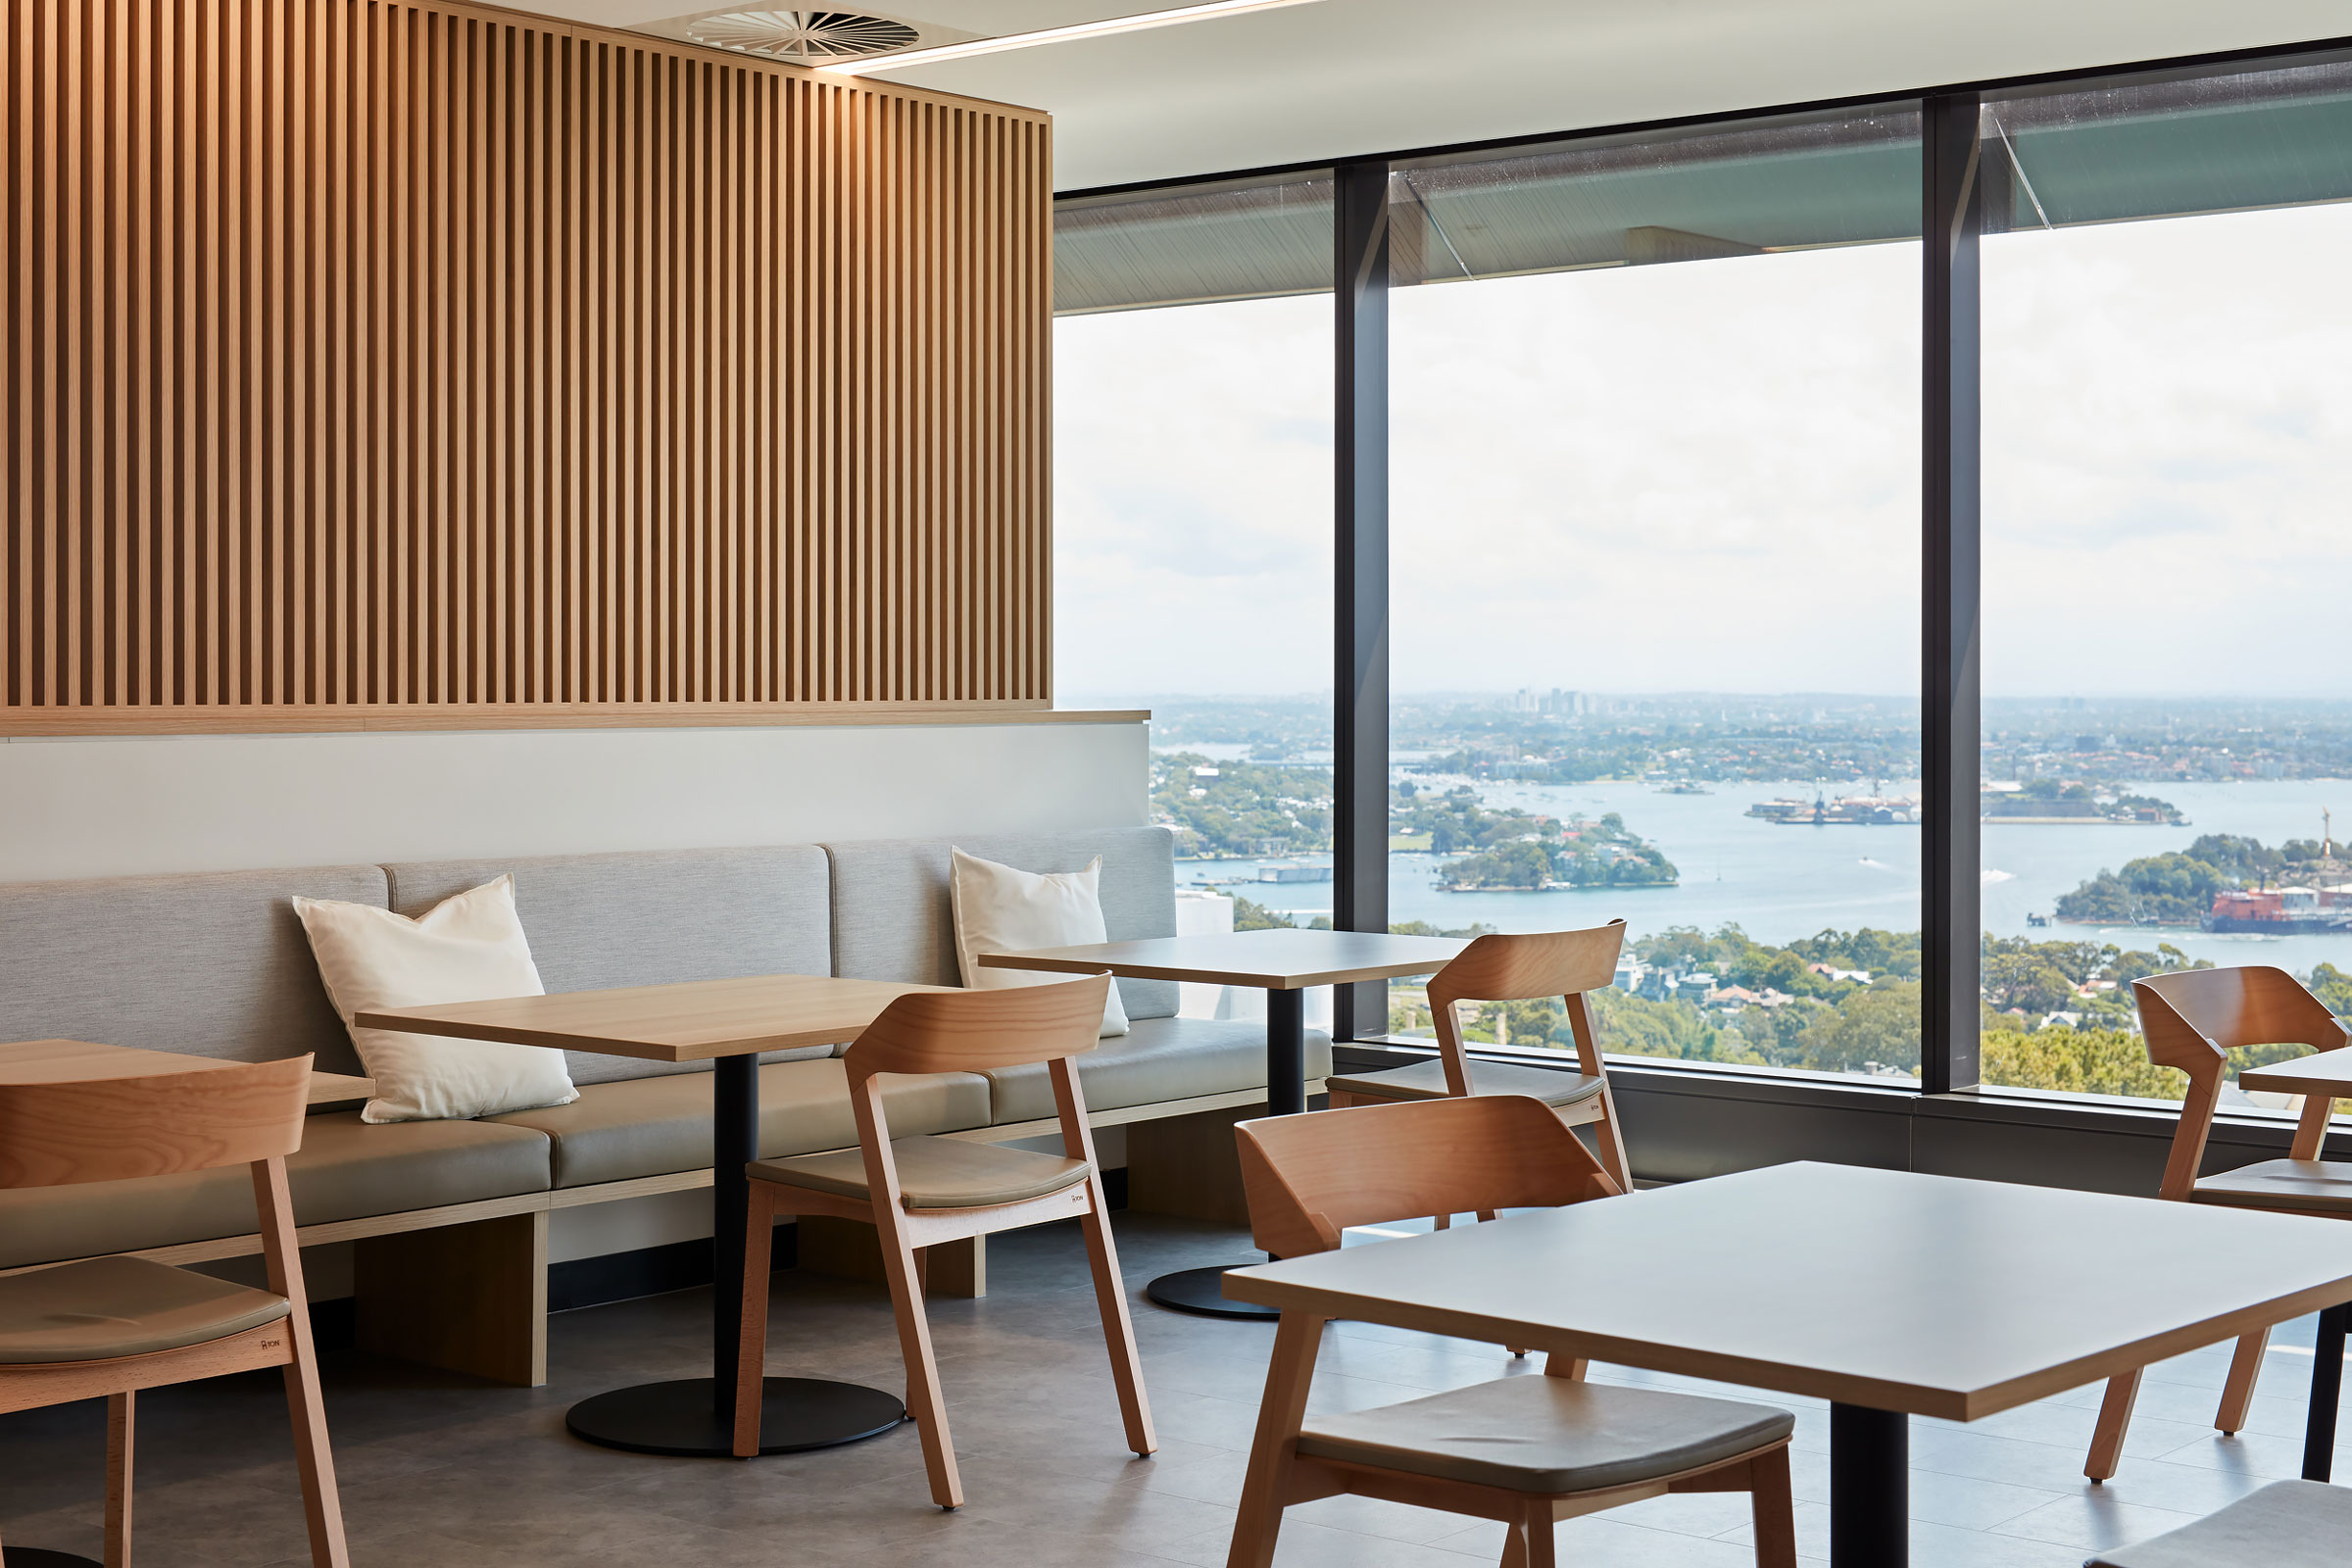 Breakout space with views over Sydney harbour